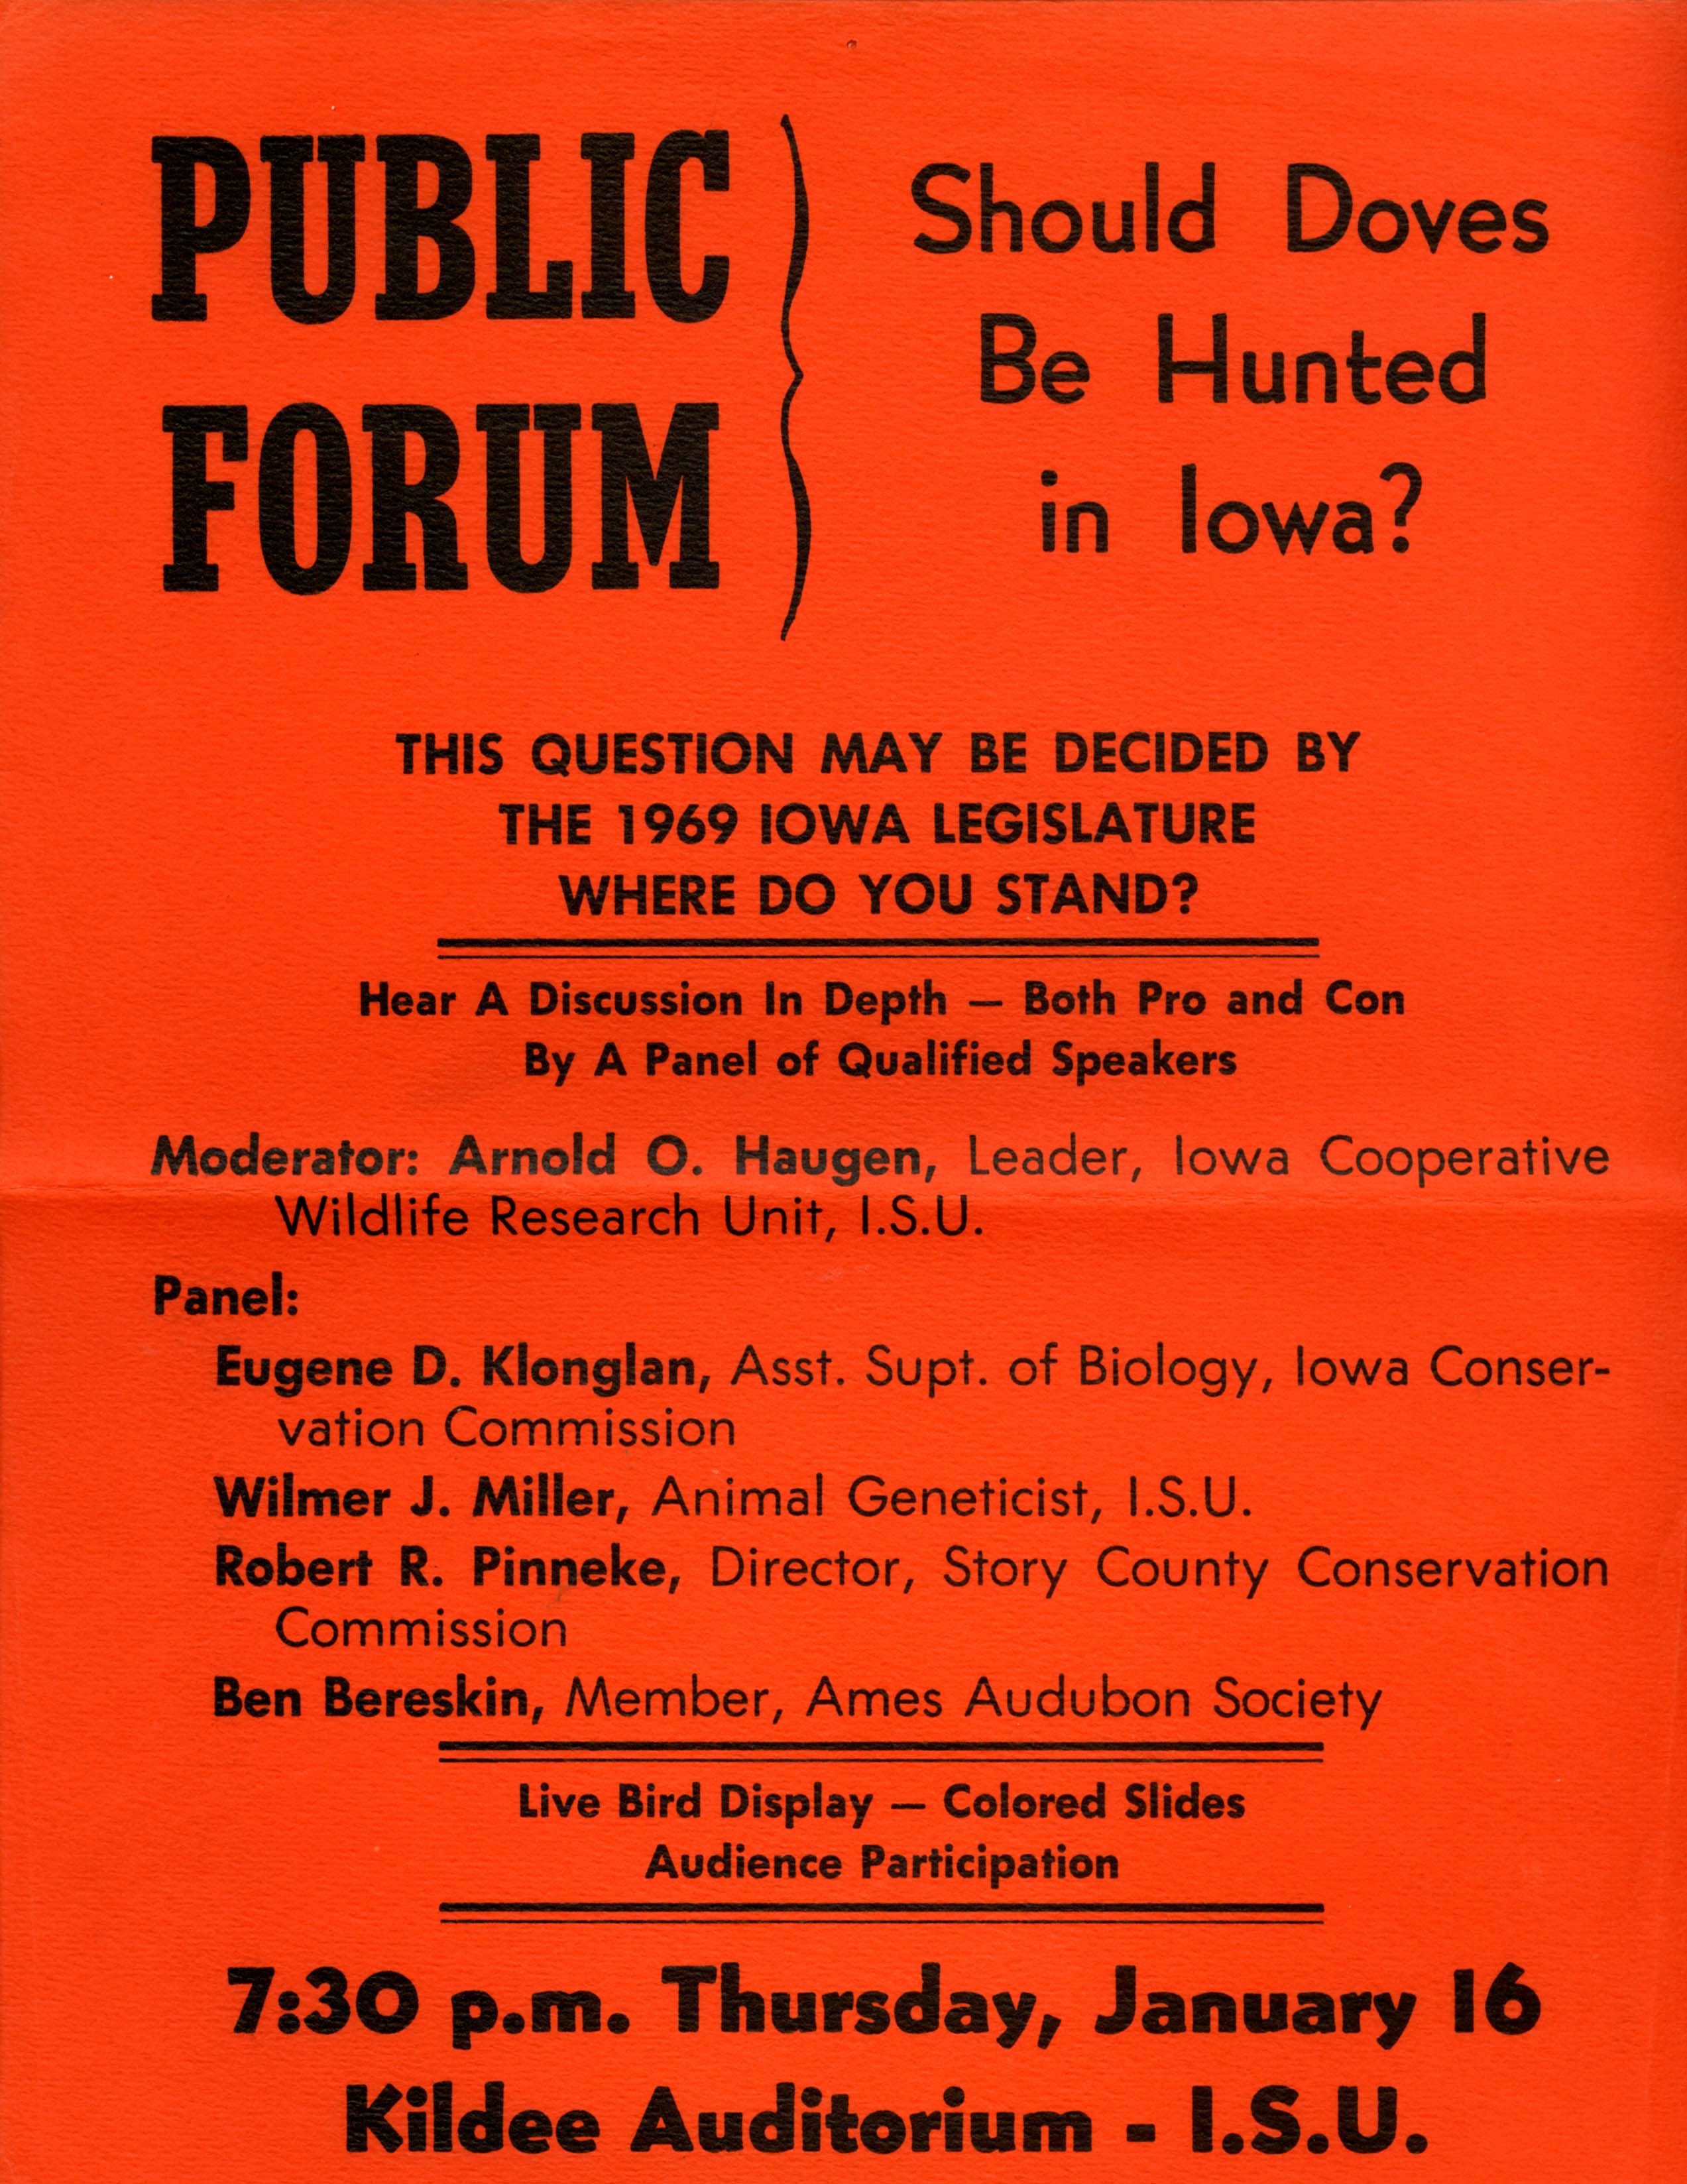 Public Forum: Should Doves Be Hunted in Iowa?